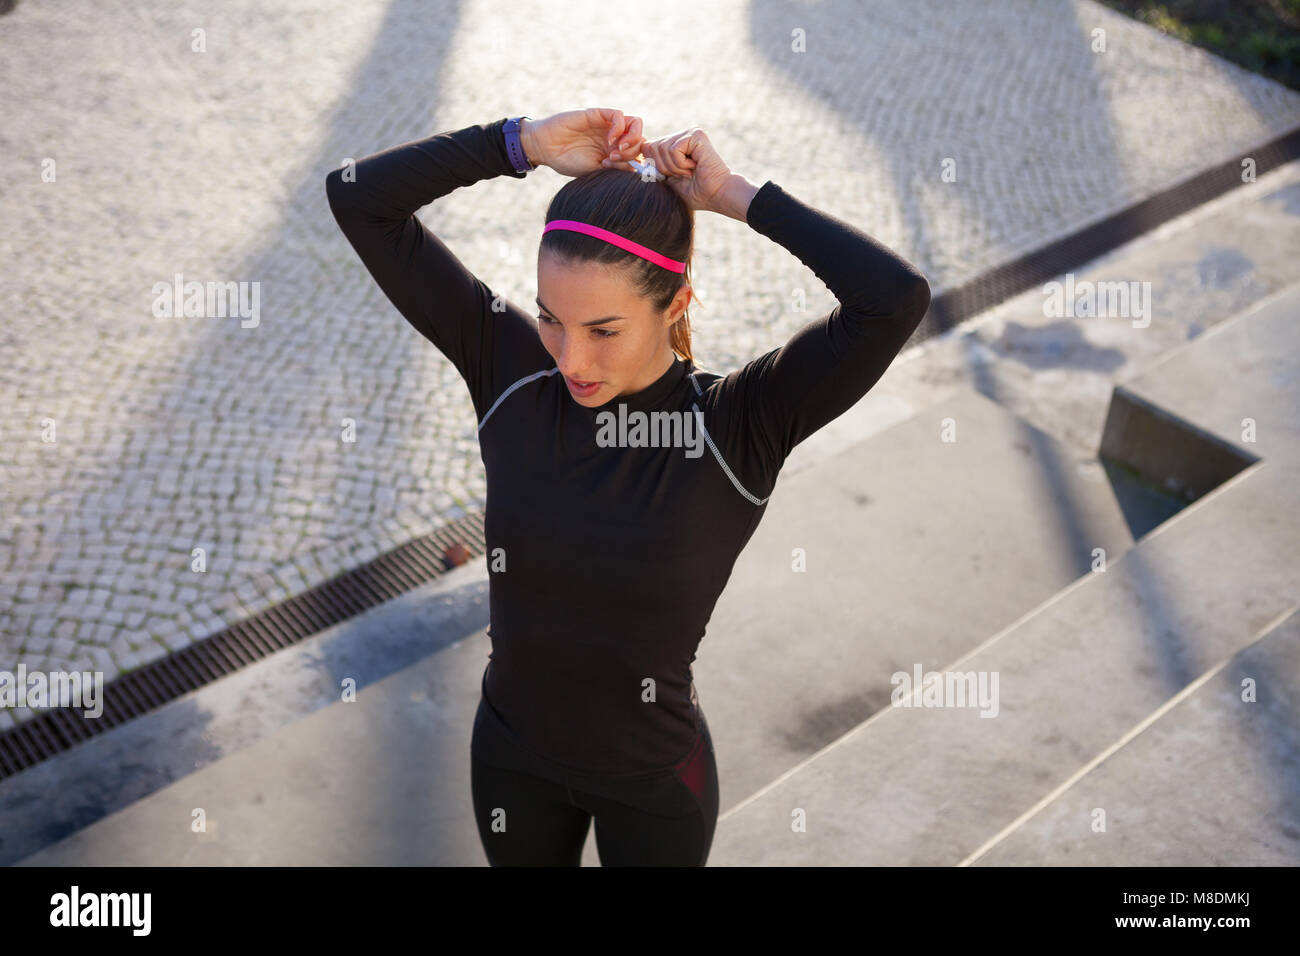 High angle view of young woman tying hair in ponytail Stock Photo